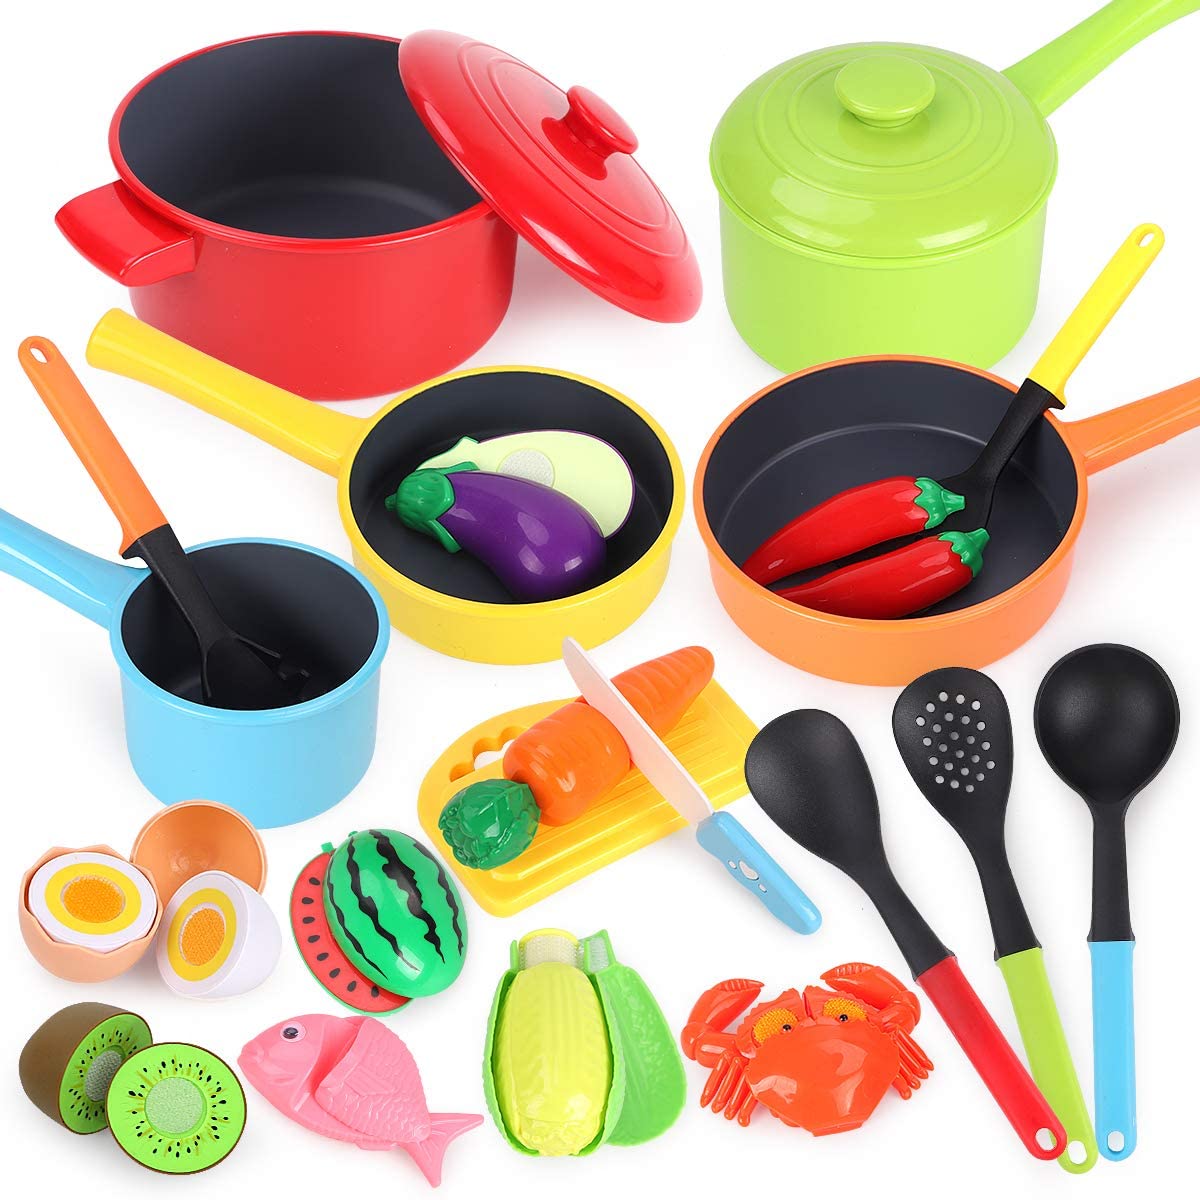 Kids Kitchen Utensils Cutting Fruit Vegetable Food Cooking Pretend Play Toys 